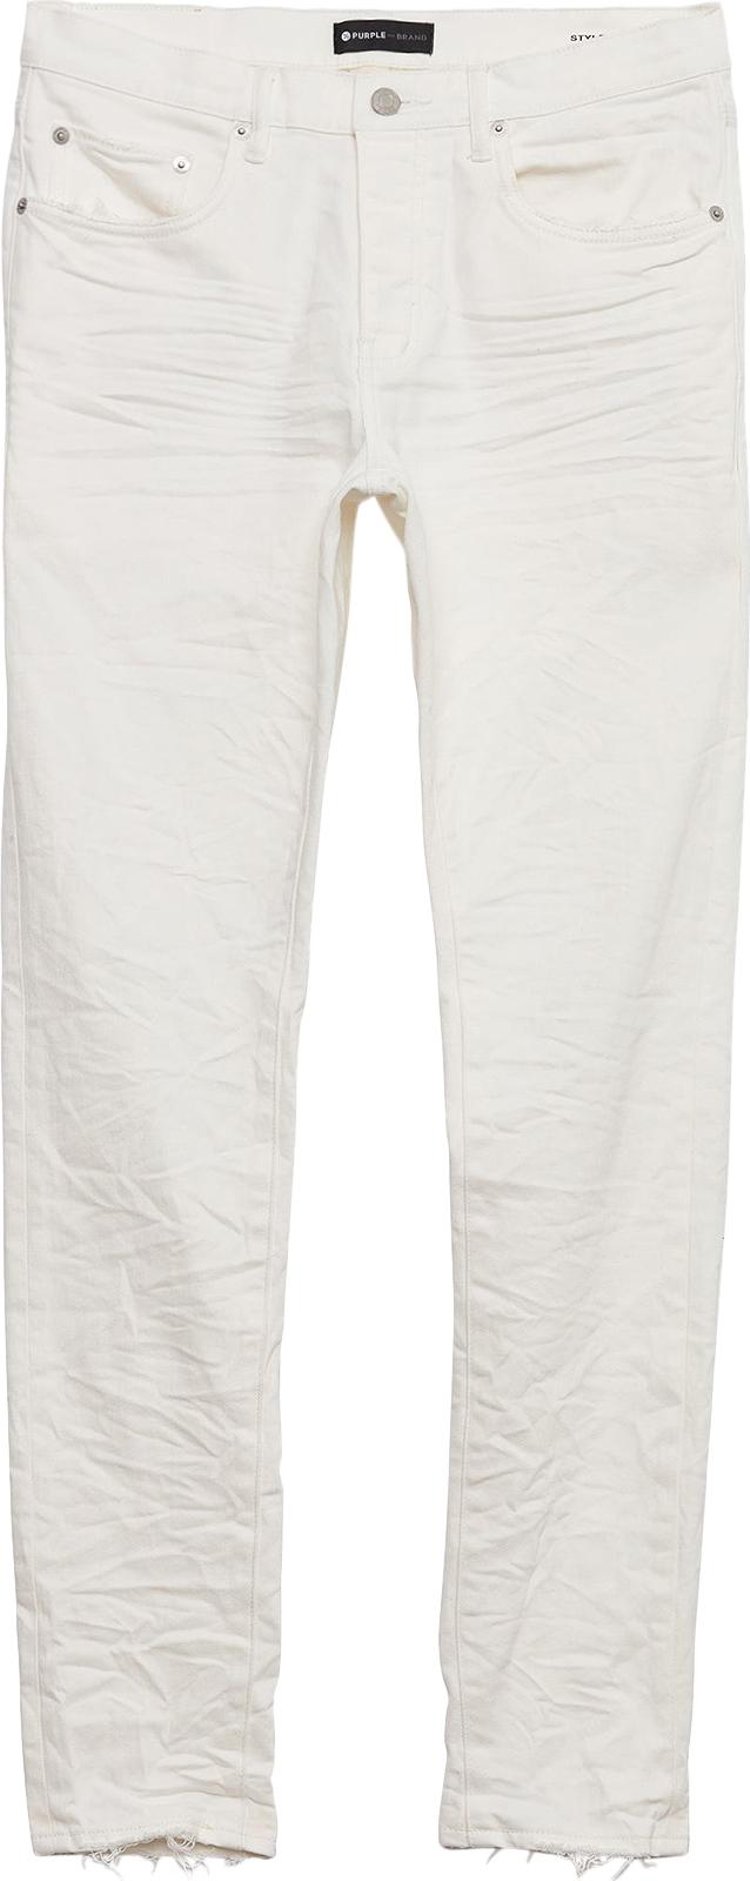 Buy PURPLE BRAND Low Rise Skinny Jeans 'Optic White' - P001 OPWH122 | GOAT